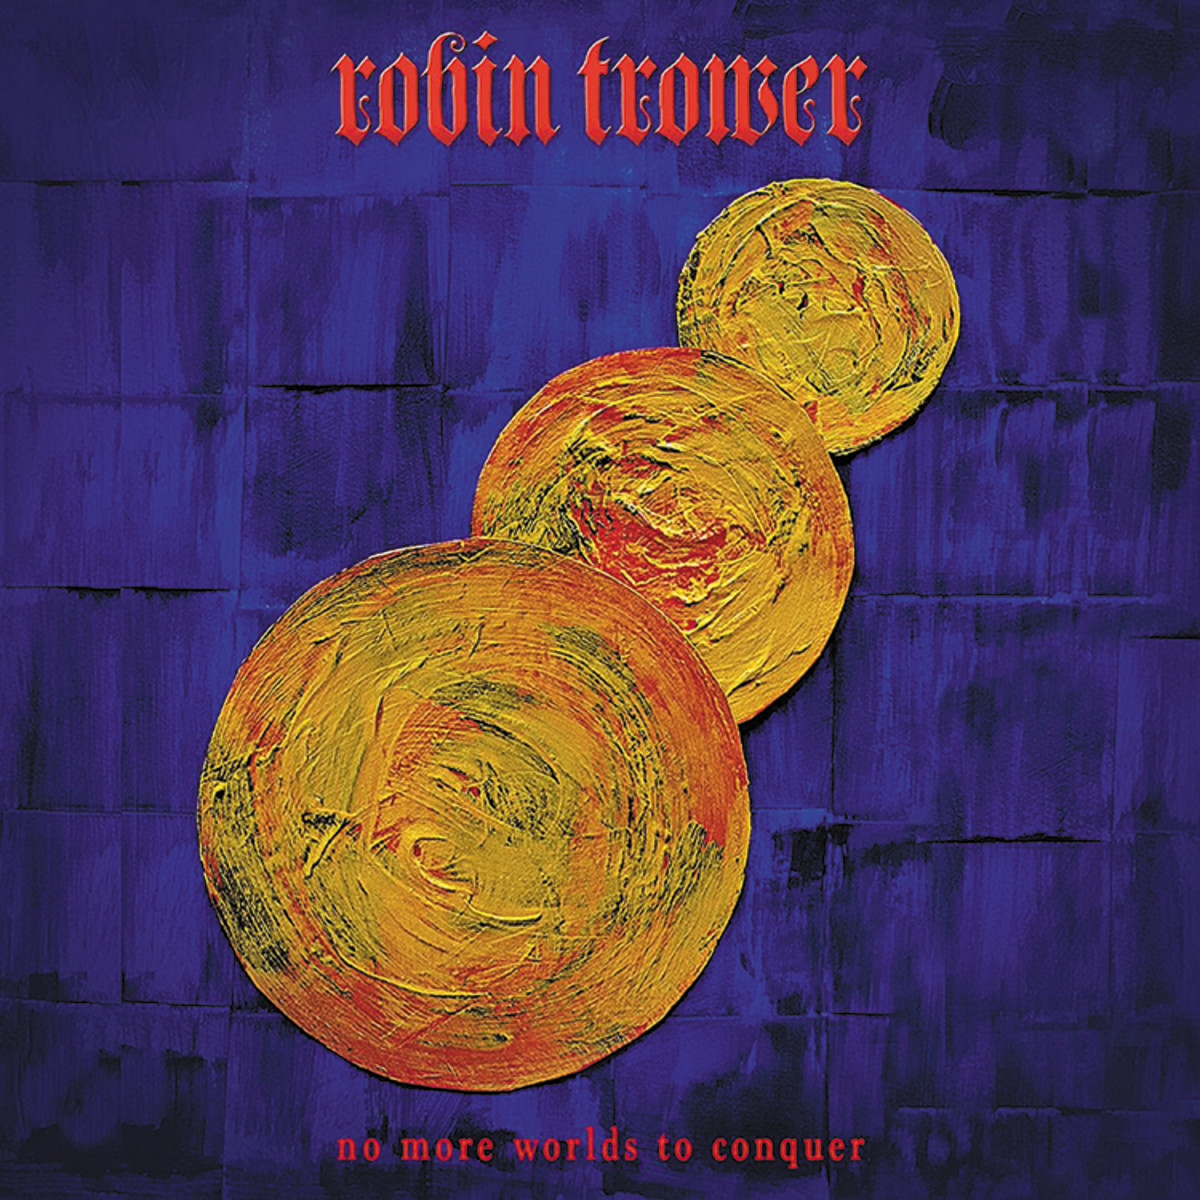 Robin Trower's "No More Worlds to Conquer"